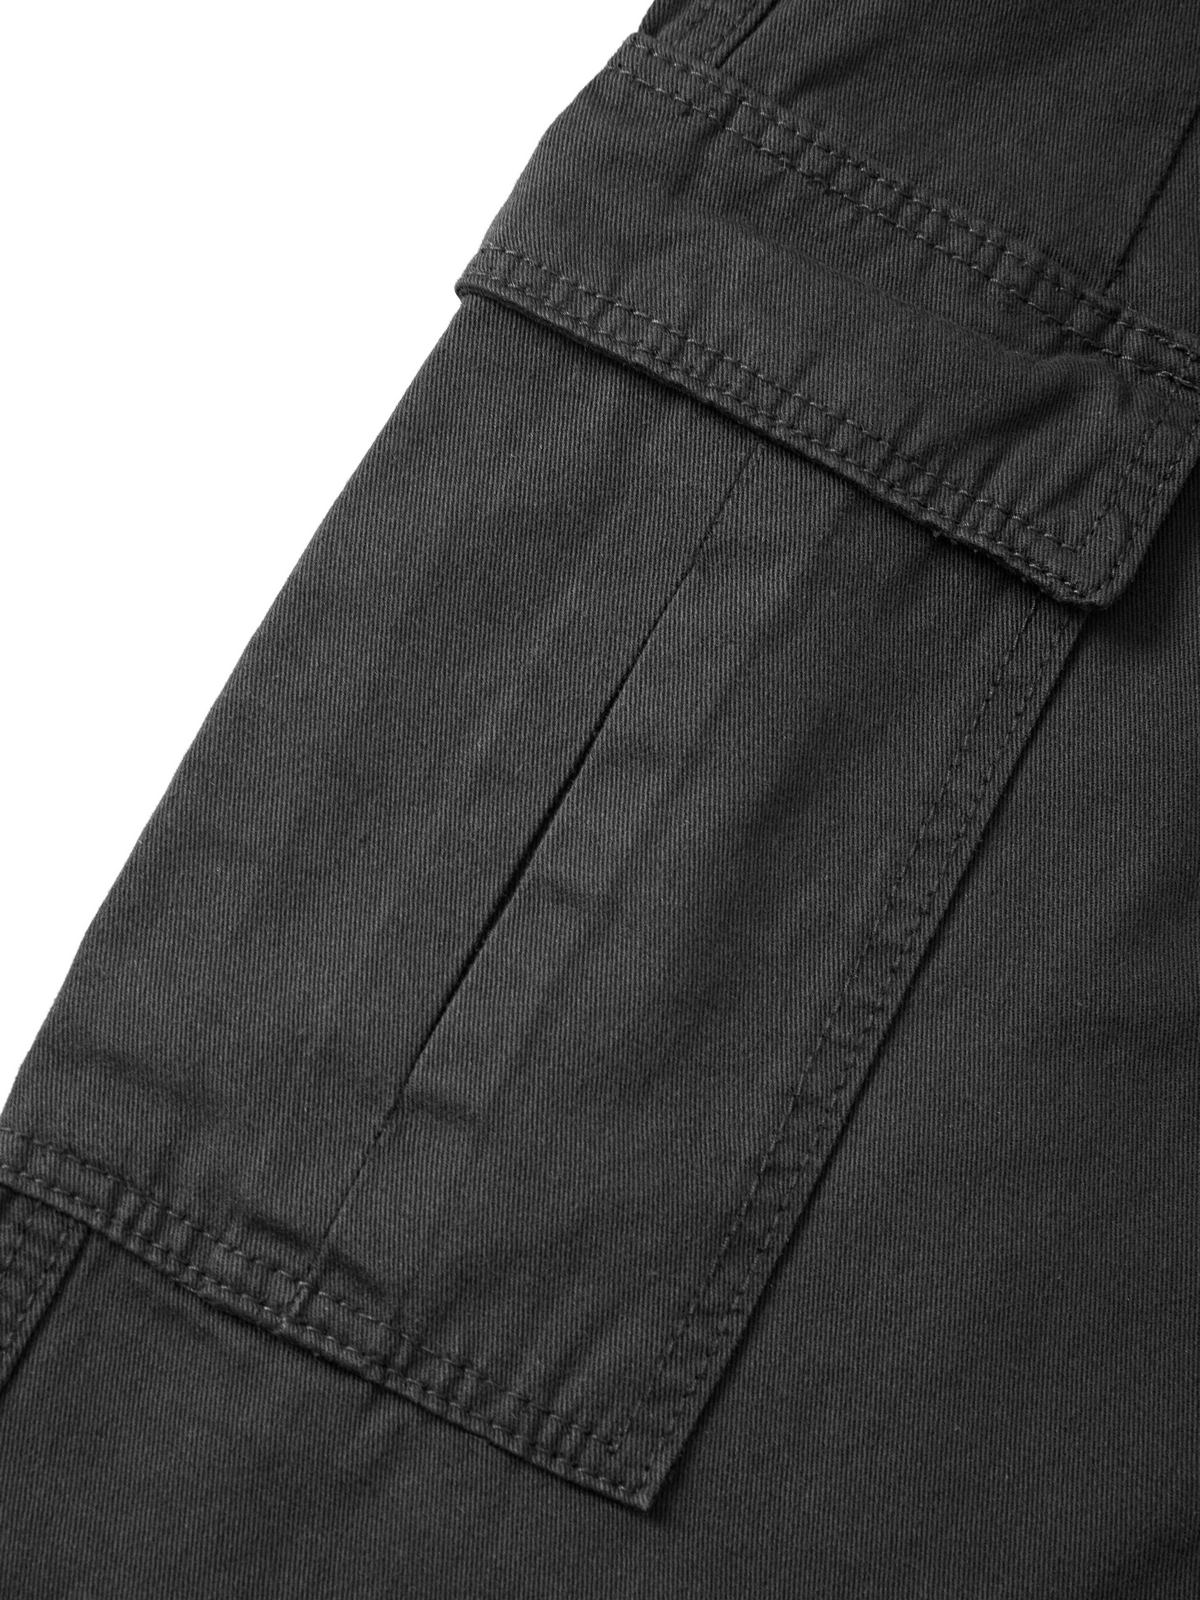 Men's Cargo Pocket Patched Straight Leg Jeans